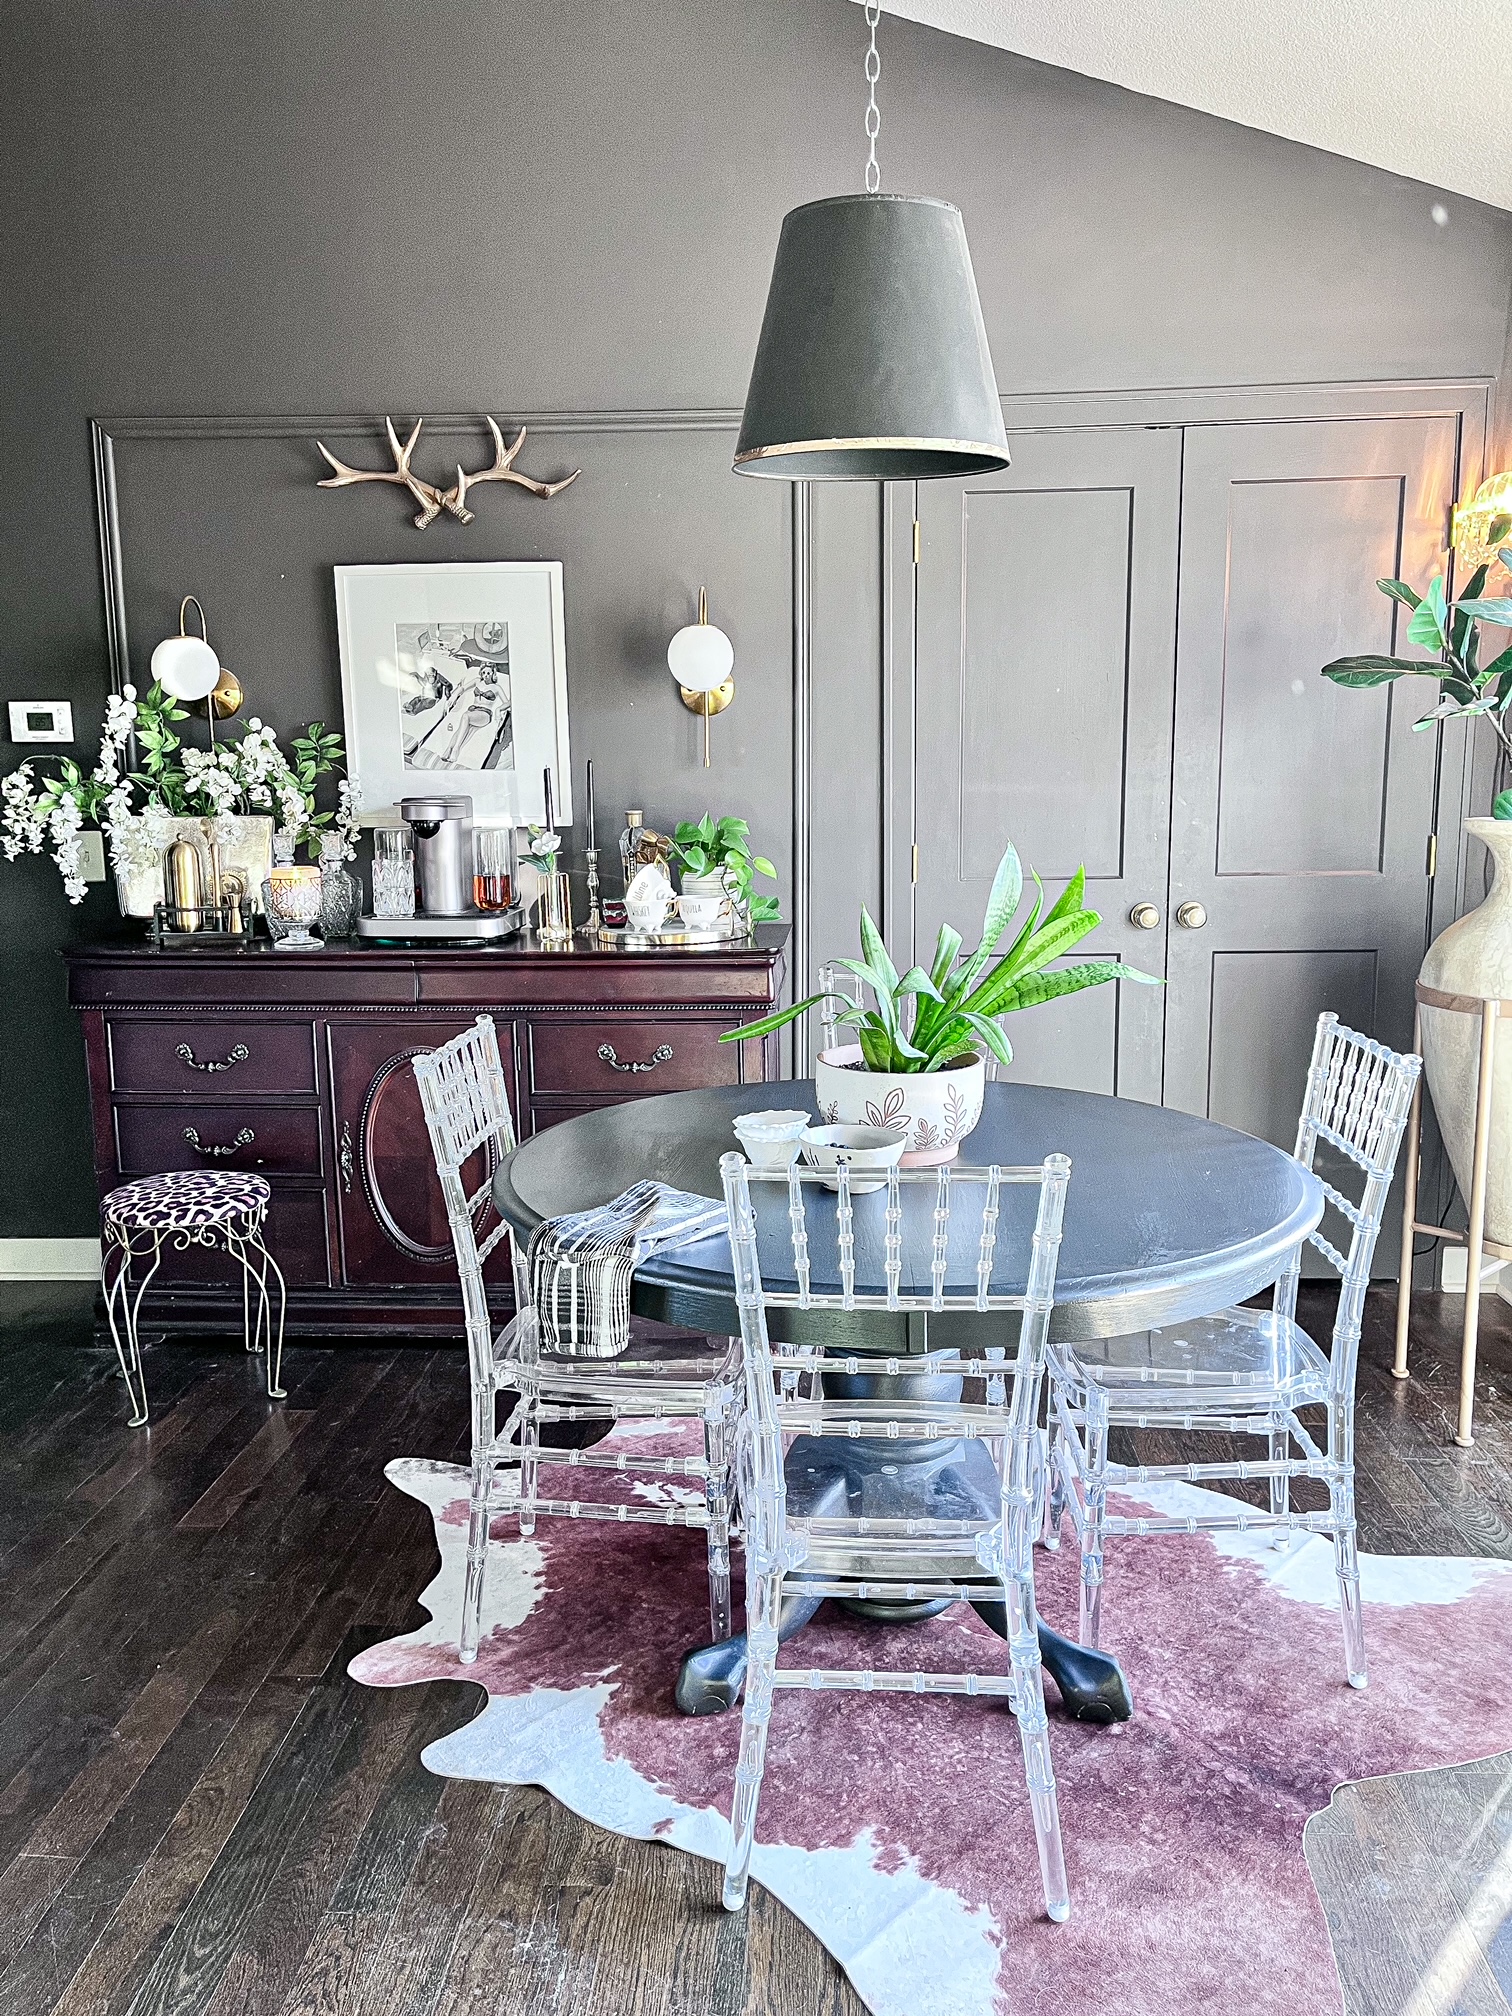 Spray Painted dining room table and chairs - At Home With The Barkers